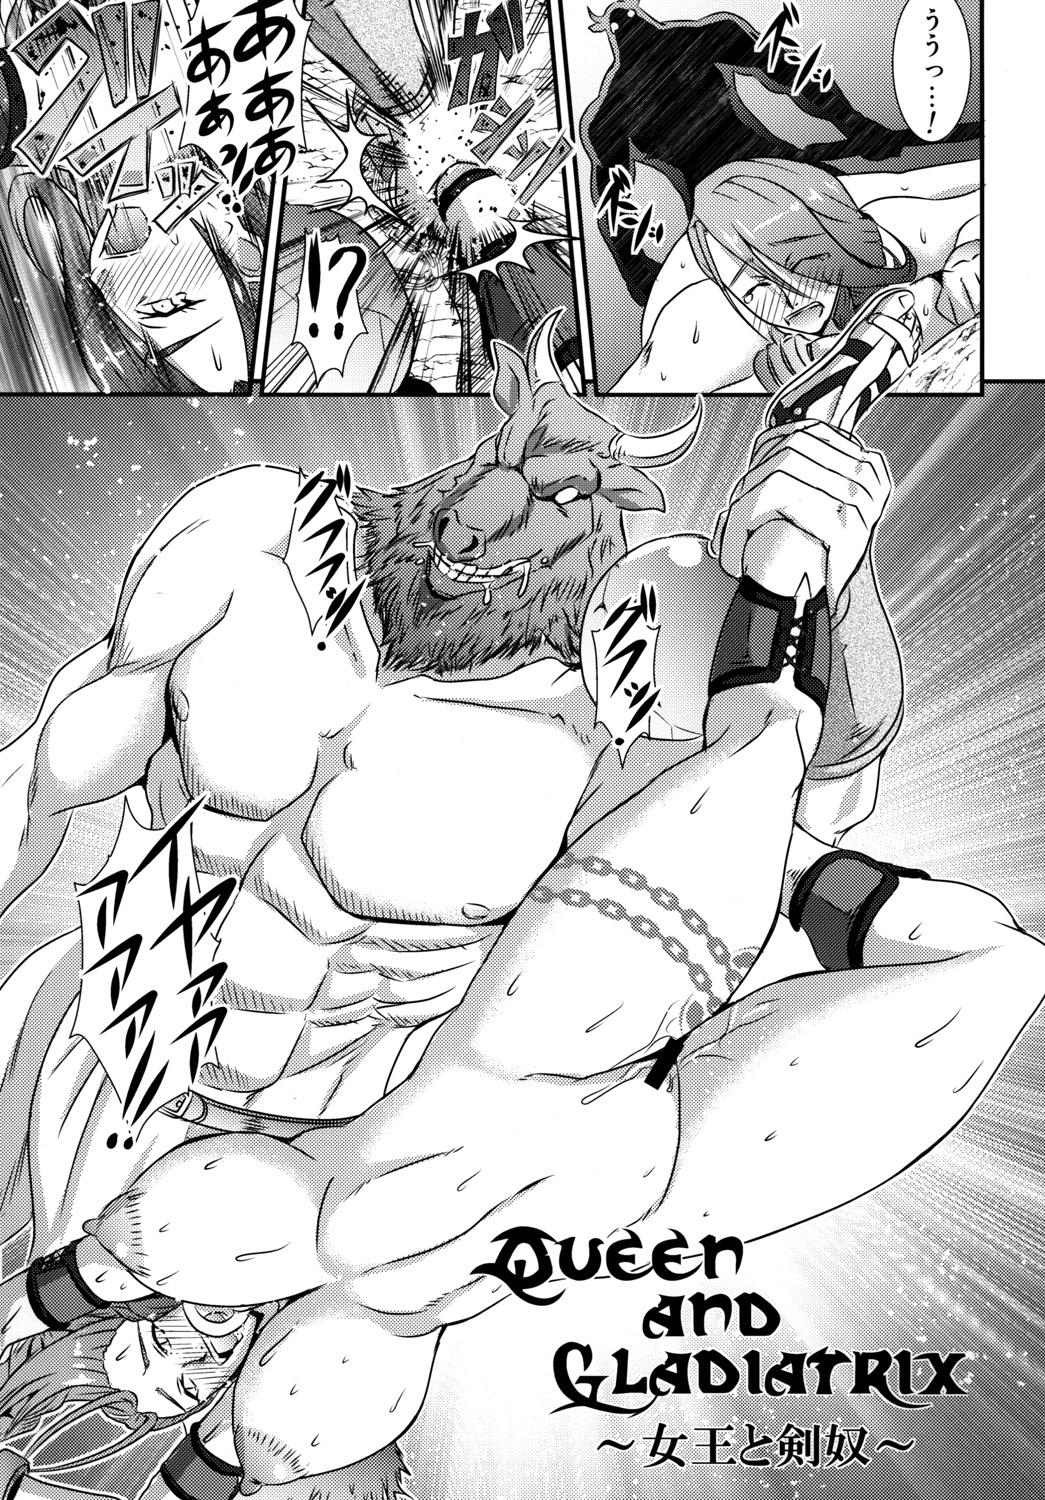 Chat Queen & Gladiatrix - Queens blade Gets - Page 4